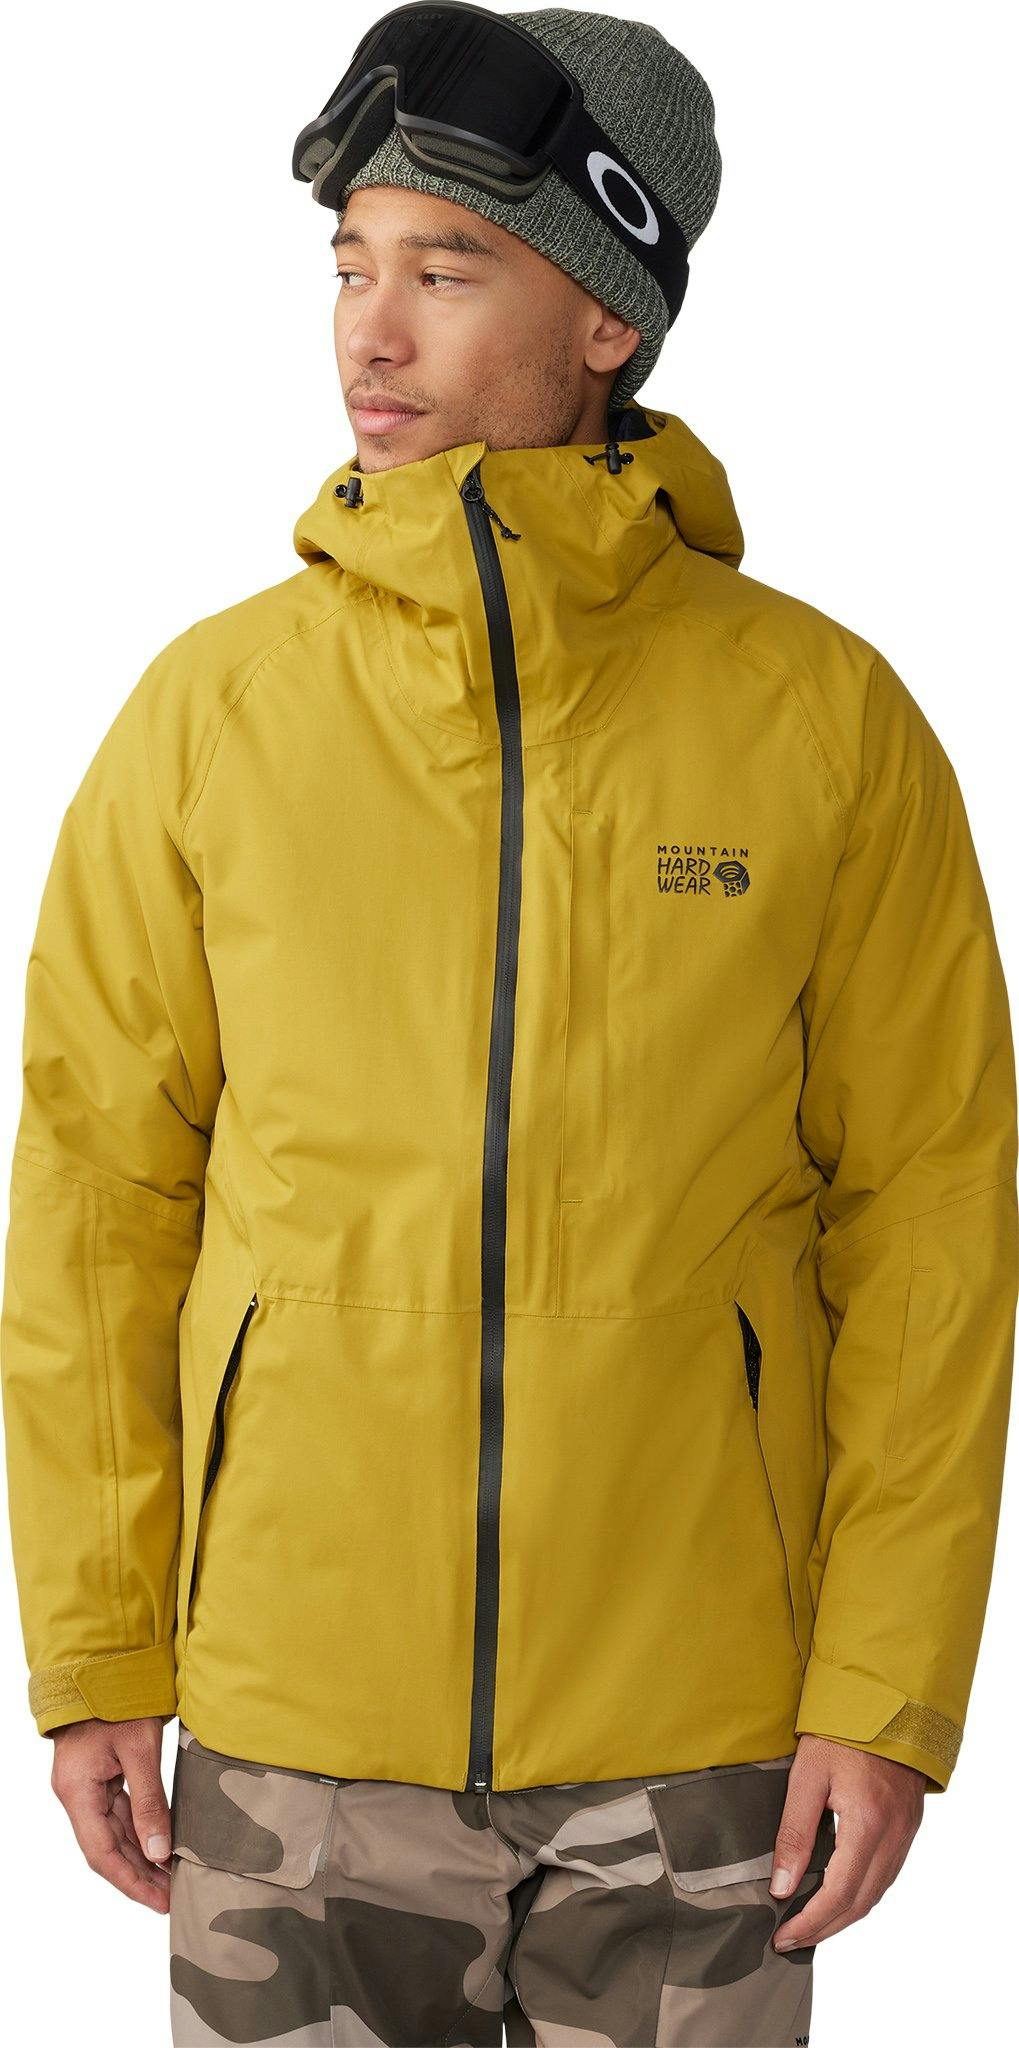 Product image for Firefall/2™ Insulated Jacket - Men's